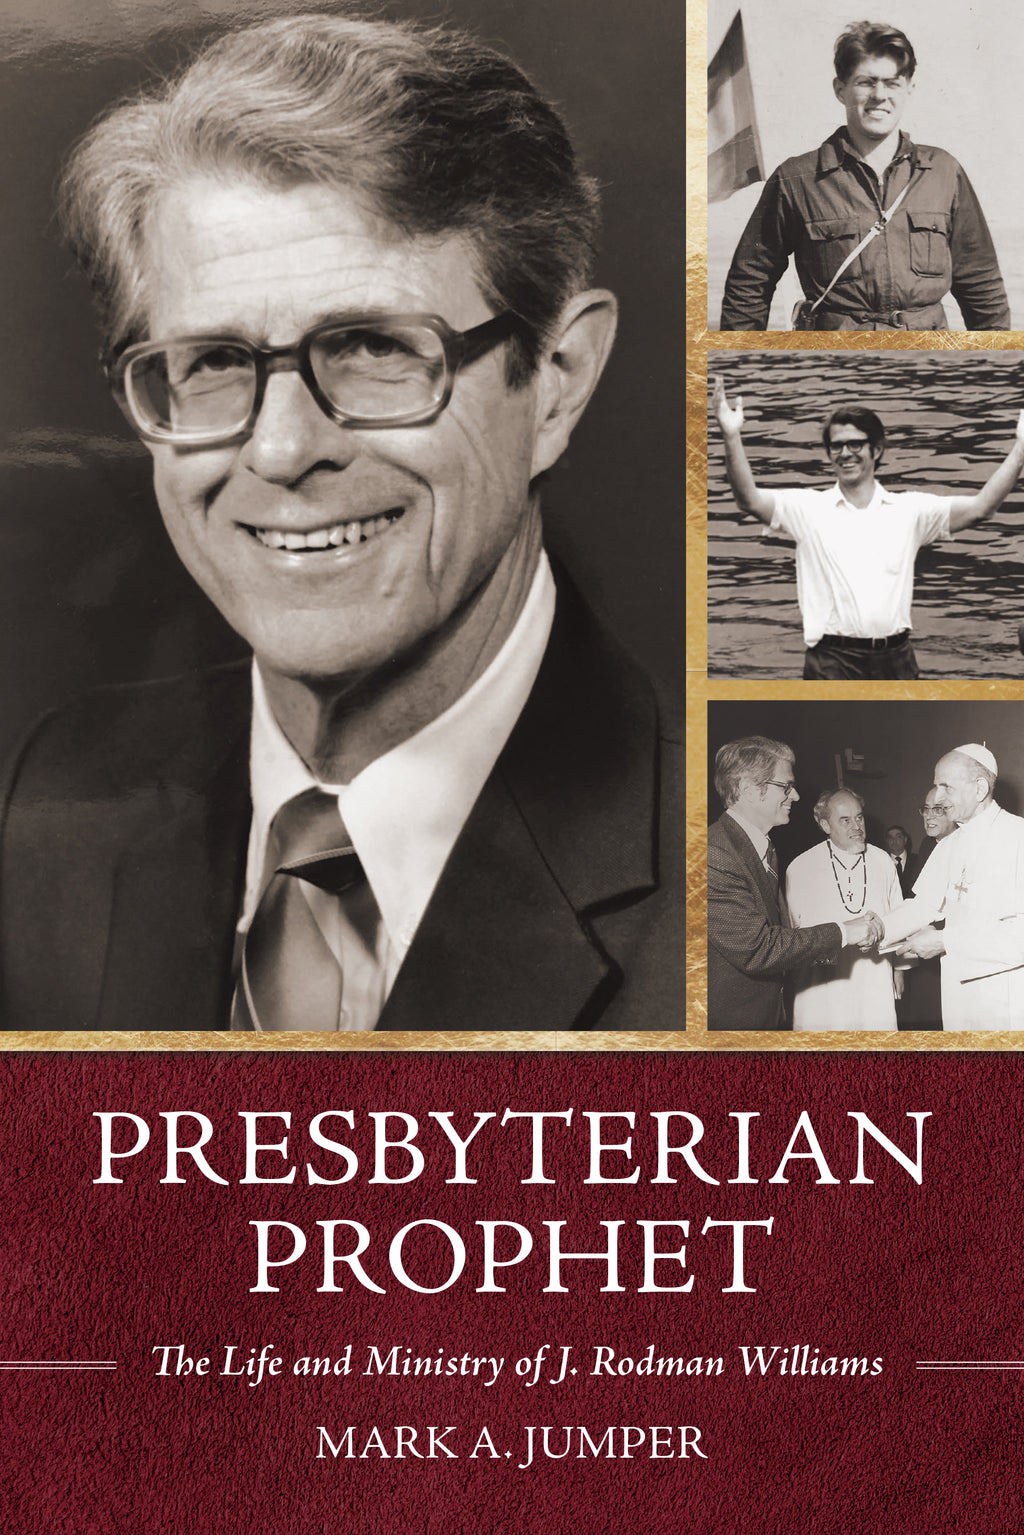 Presbyterian Prophet: The Life and Ministry of J. Rodman Williams